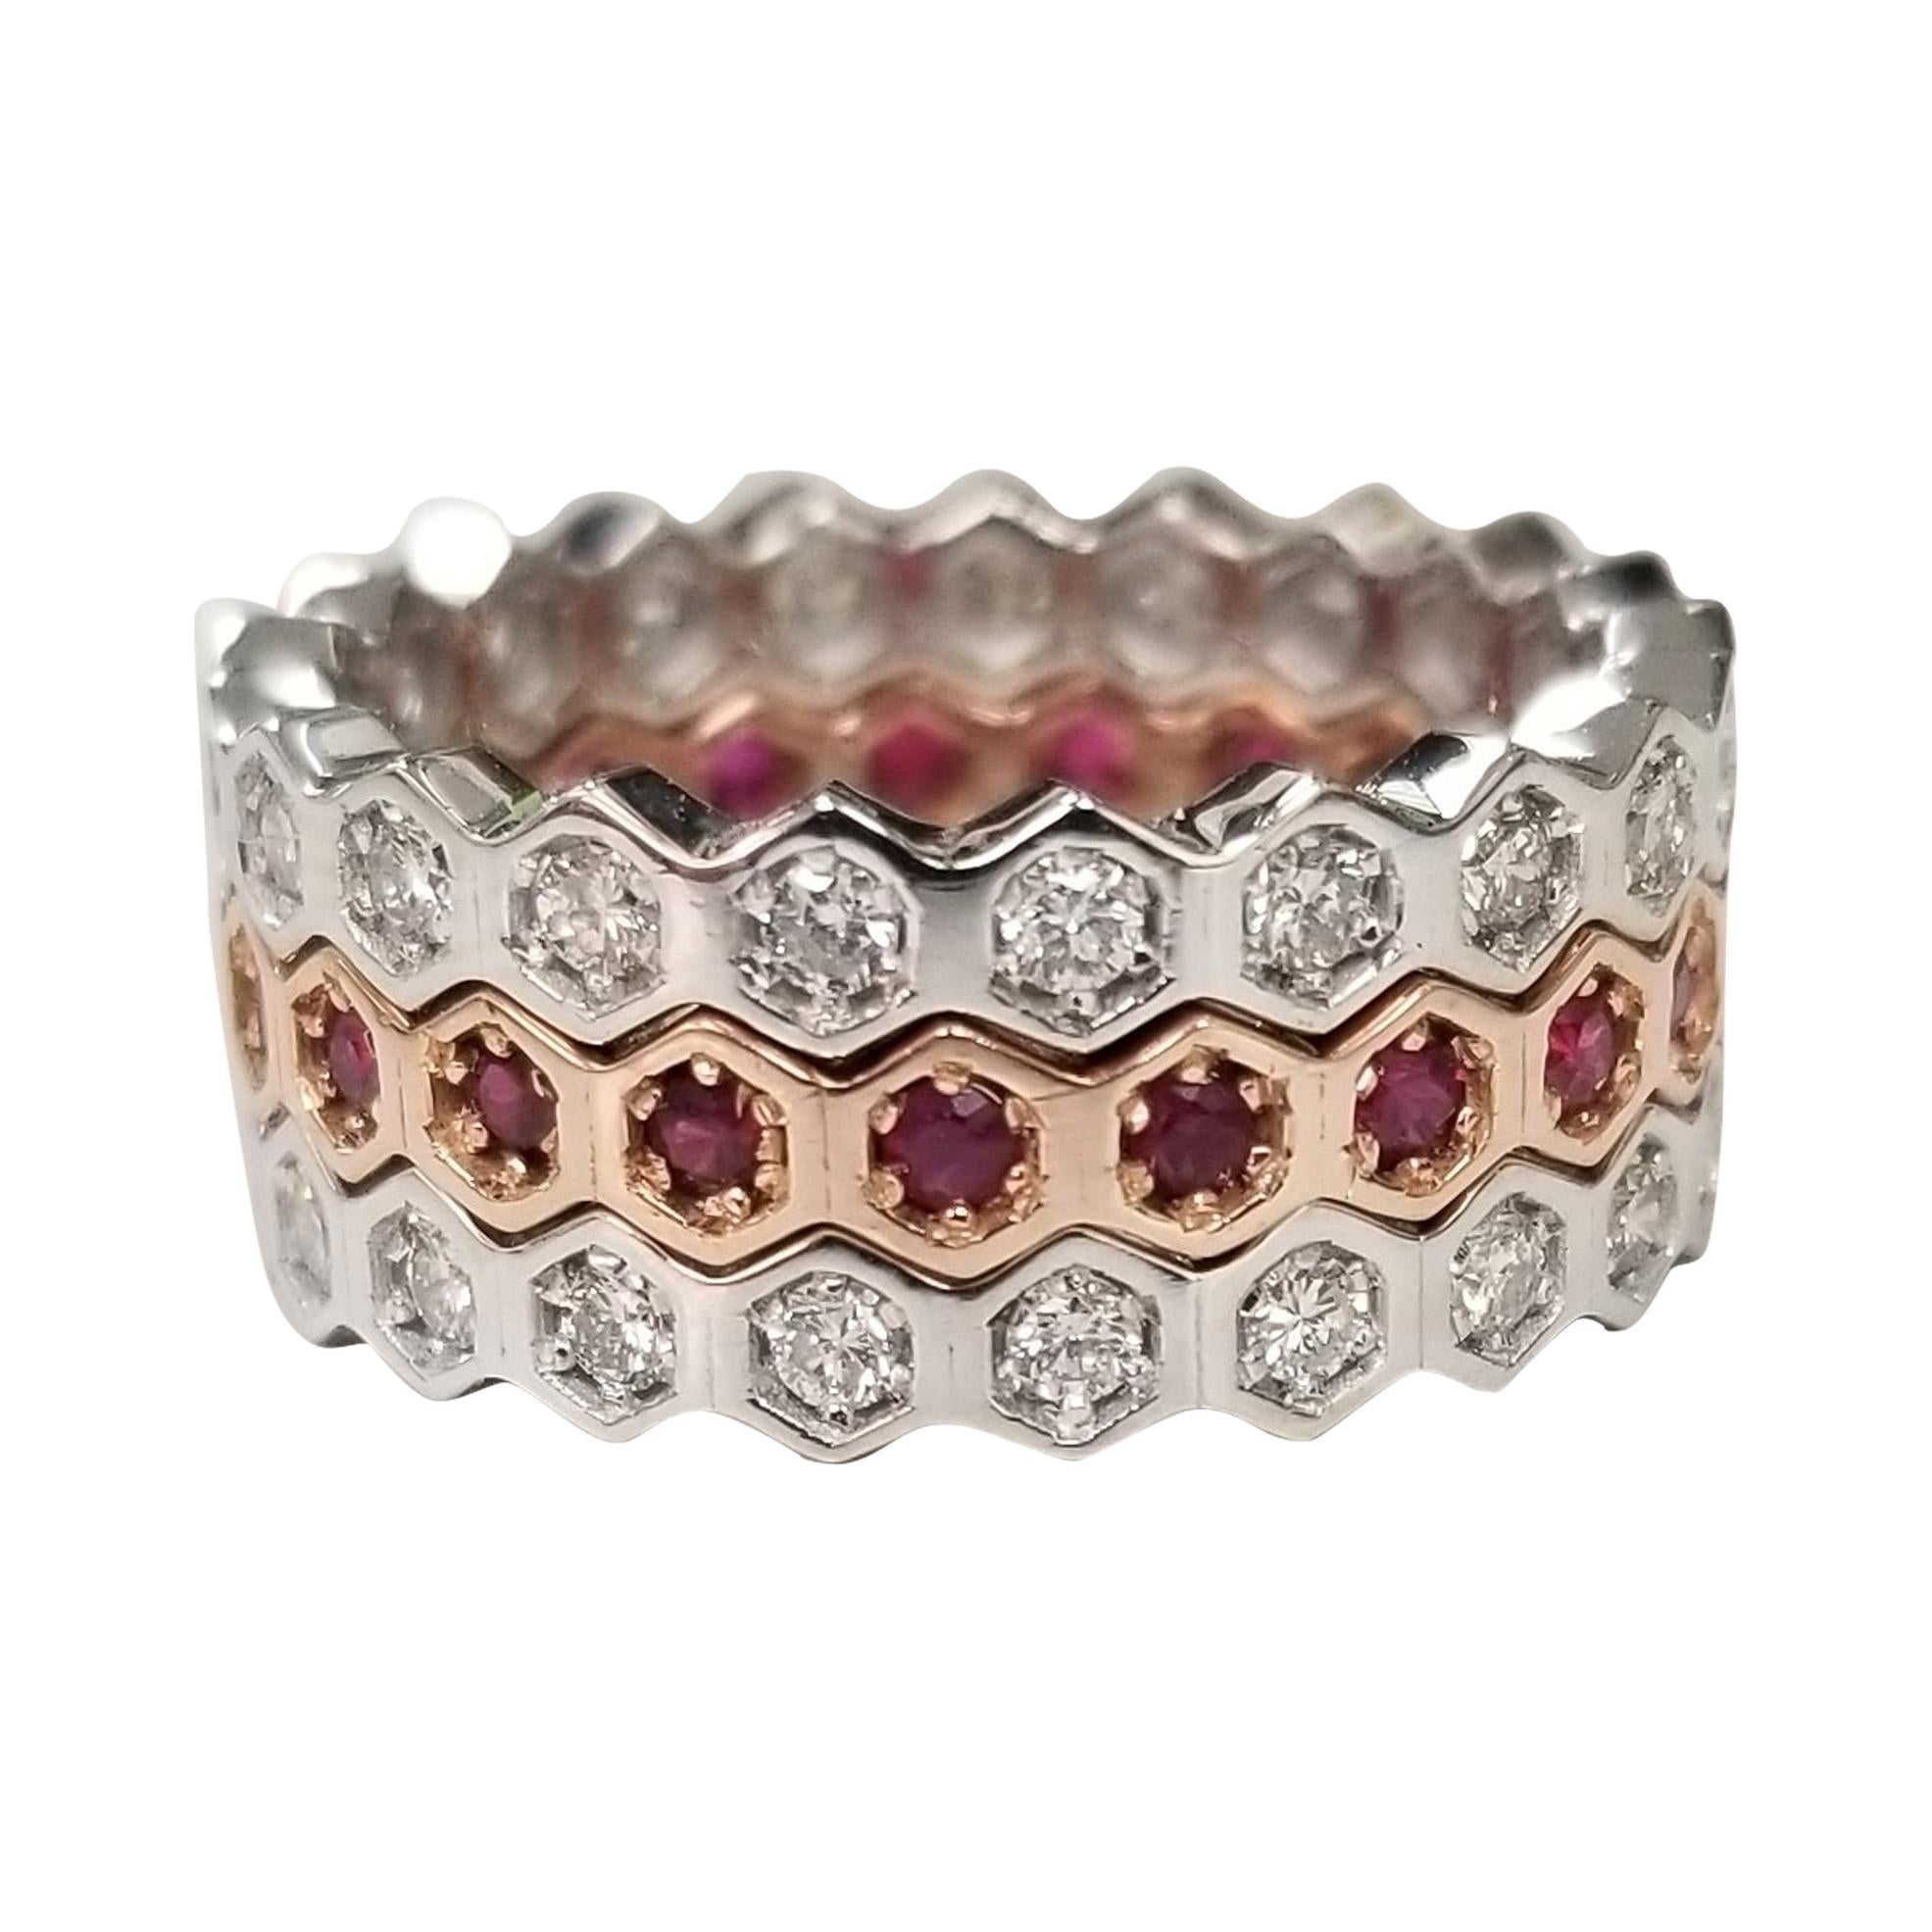 14k White and Rose Gold Stackable Rings with Diamonds and Rubies